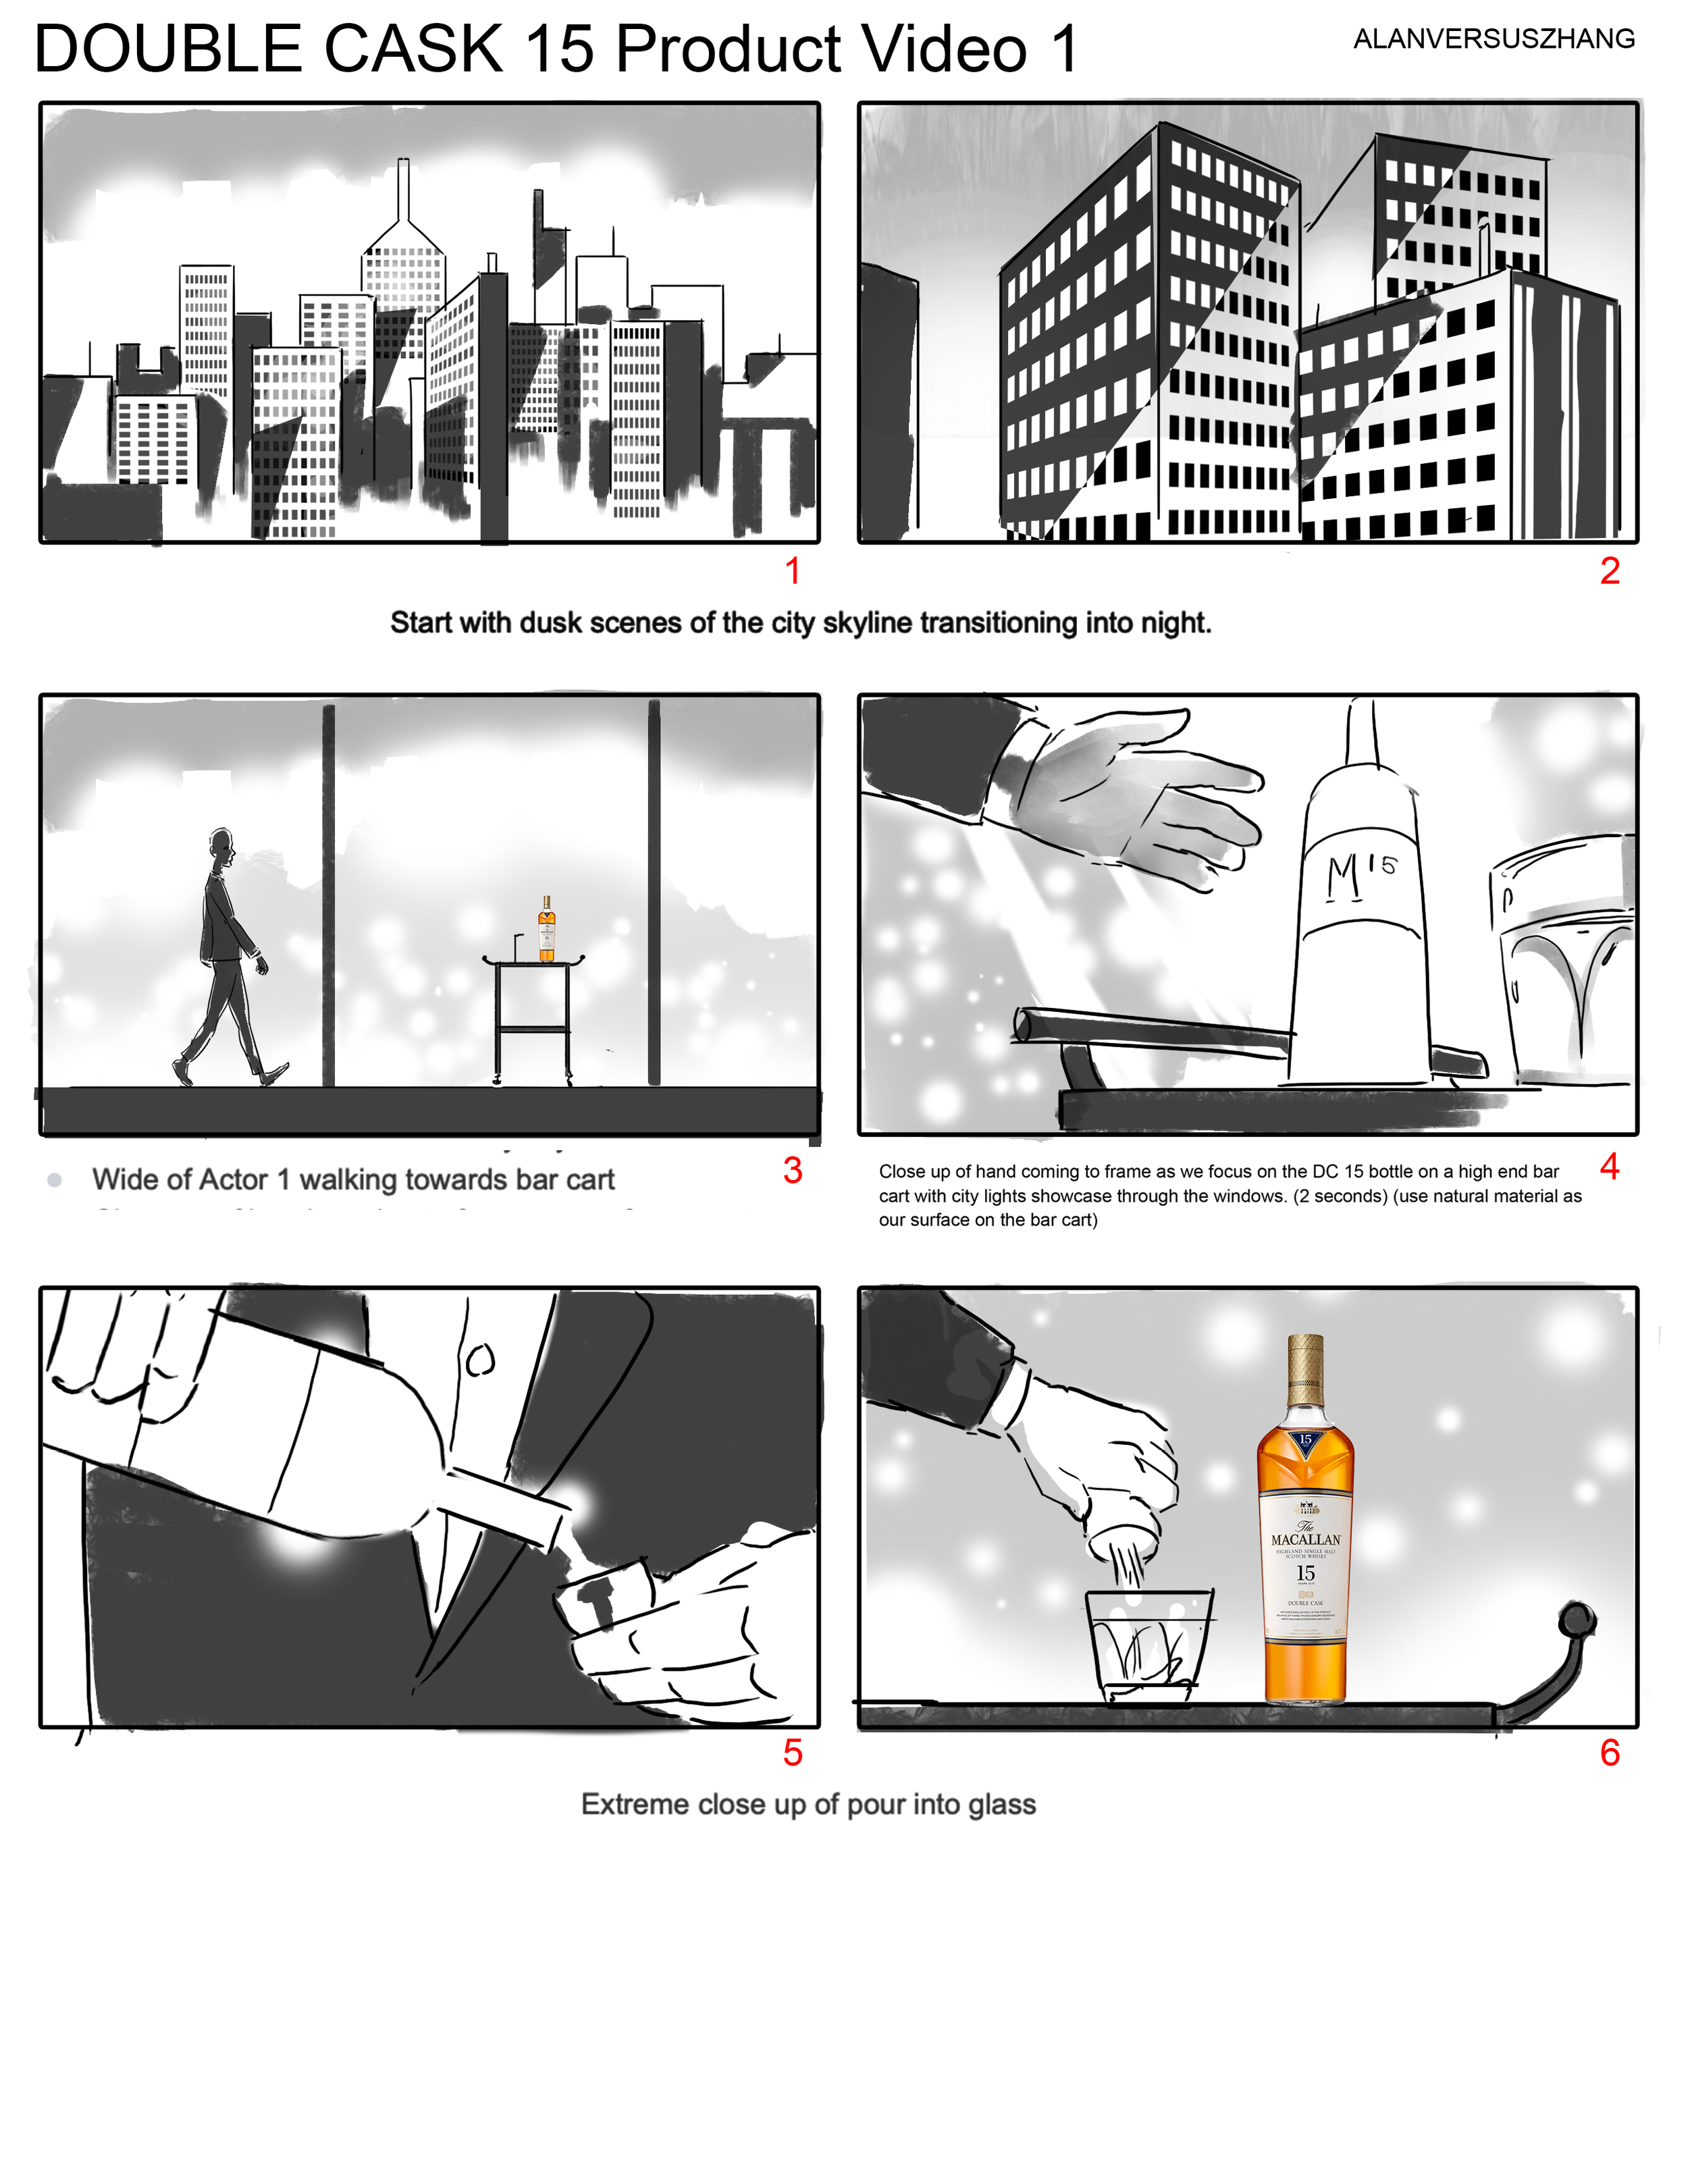 11.10.23_Macallan_Storyboards_Page_05_Image_0001.png